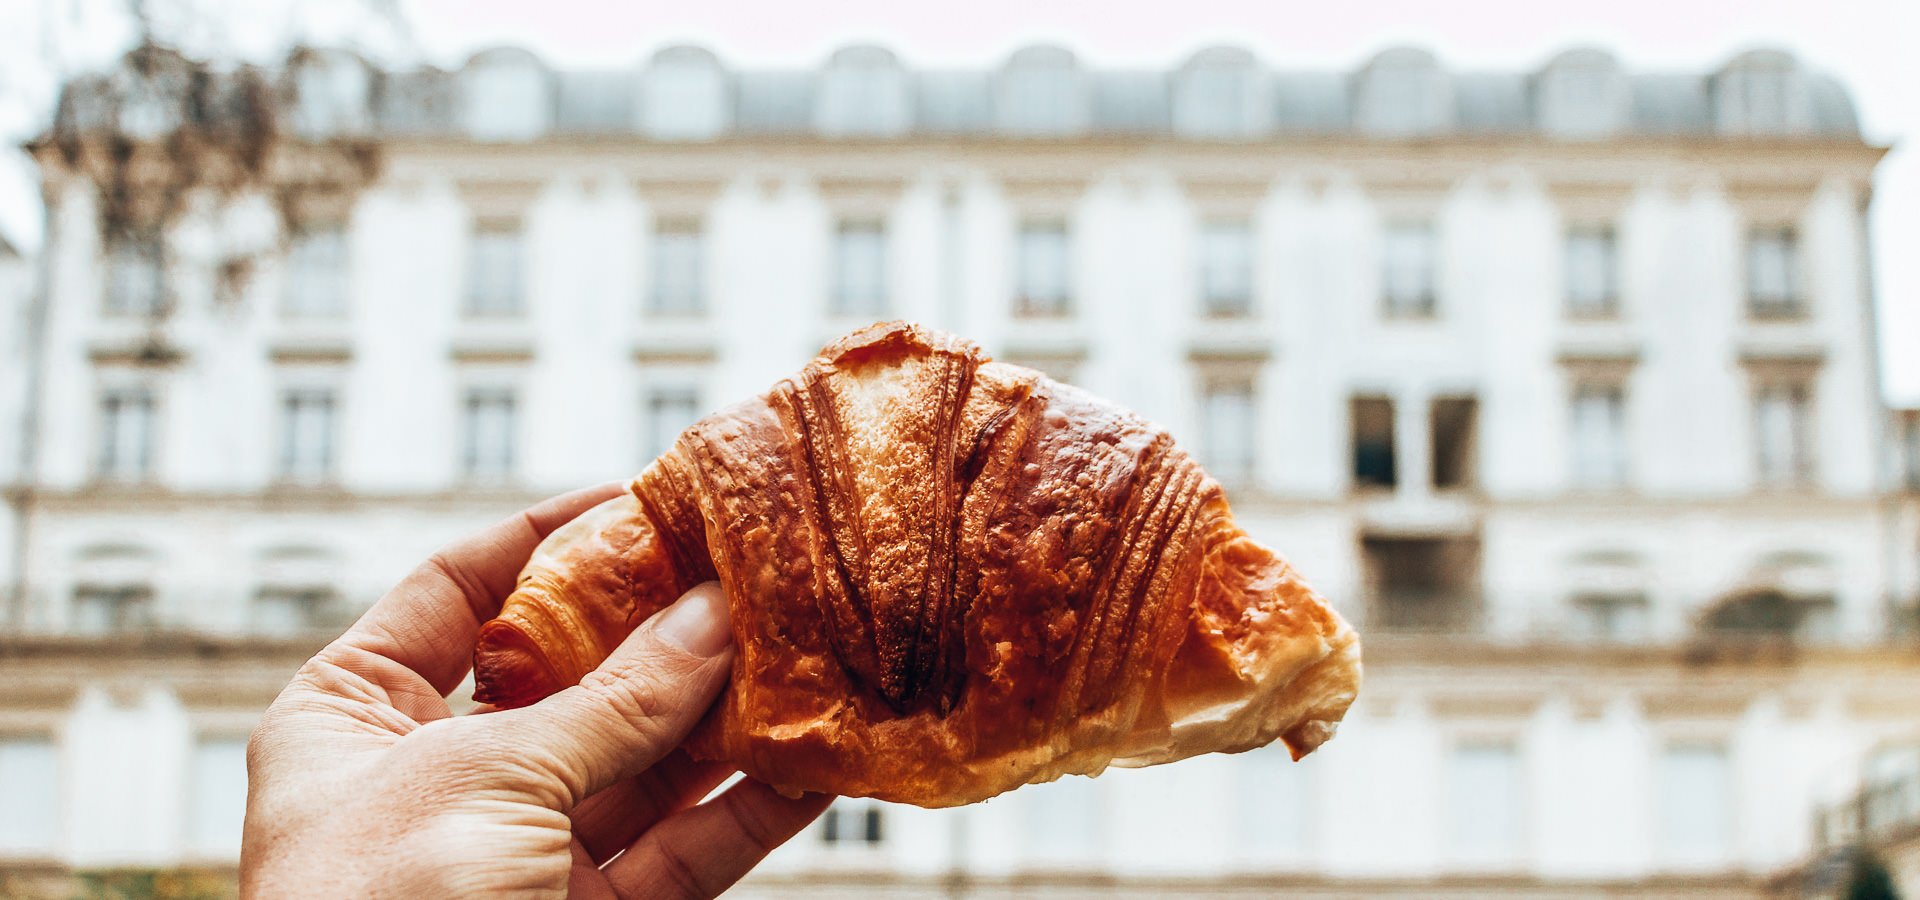 8 Of The Best Bakeries and Pâtisseries In Paris | specialty coffee Vilnius 3